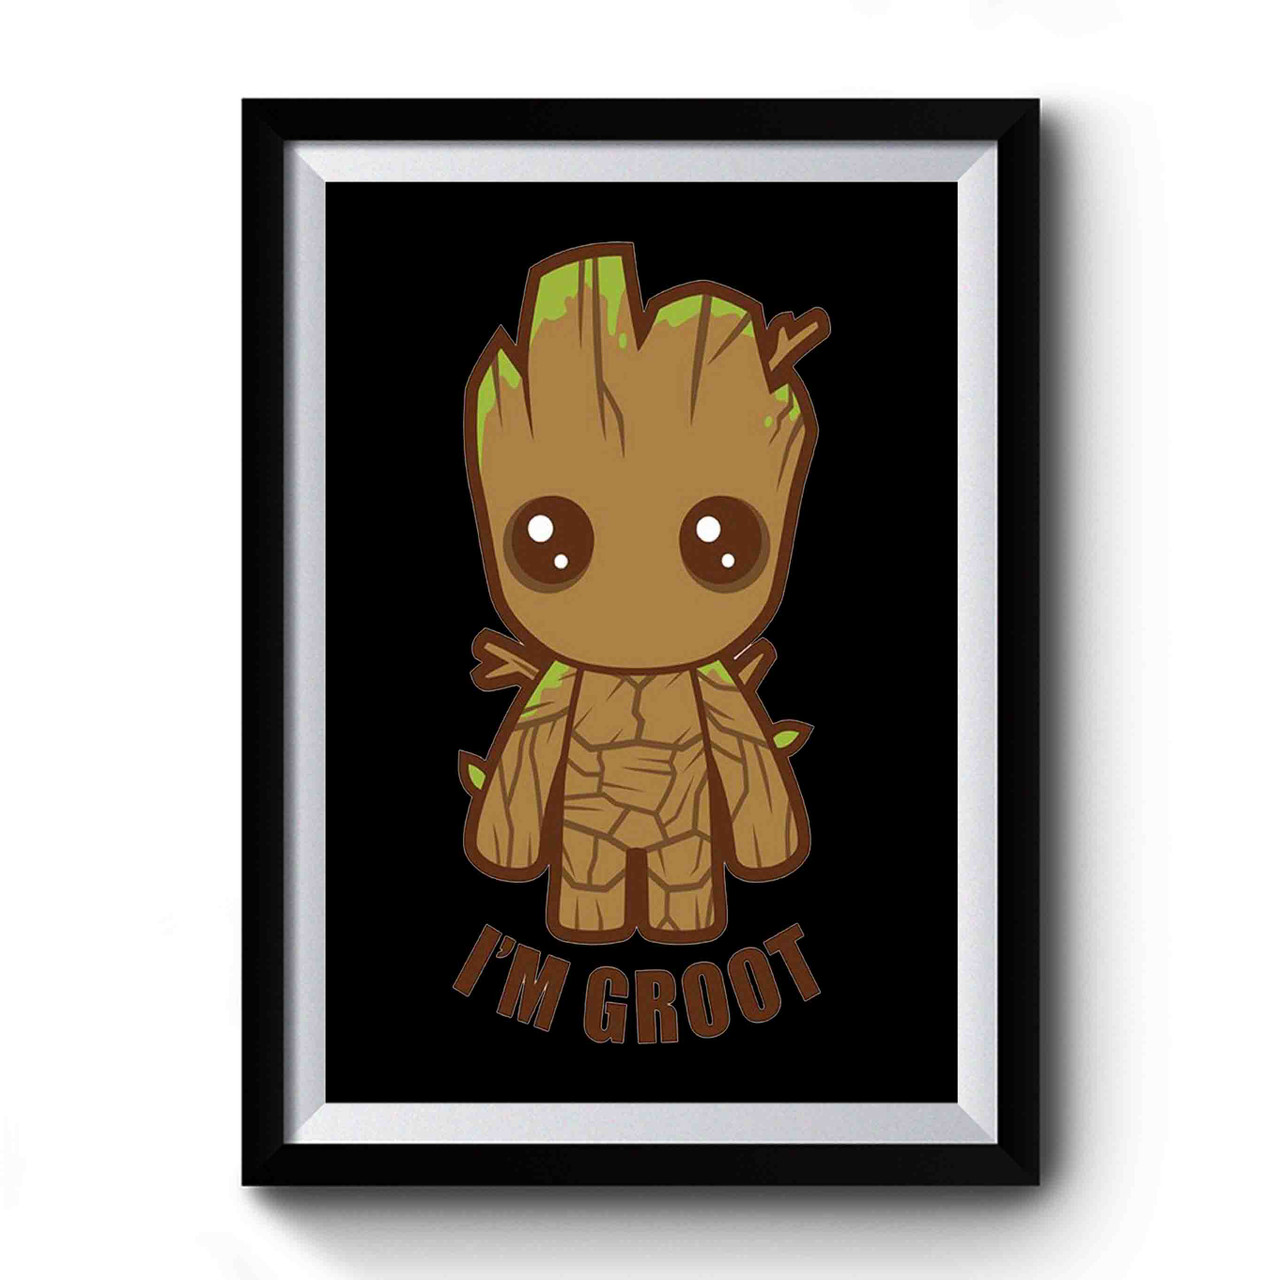 Guardians of the Galaxy Rocket & Groot Special Room Decor Print - POSTER  20x30